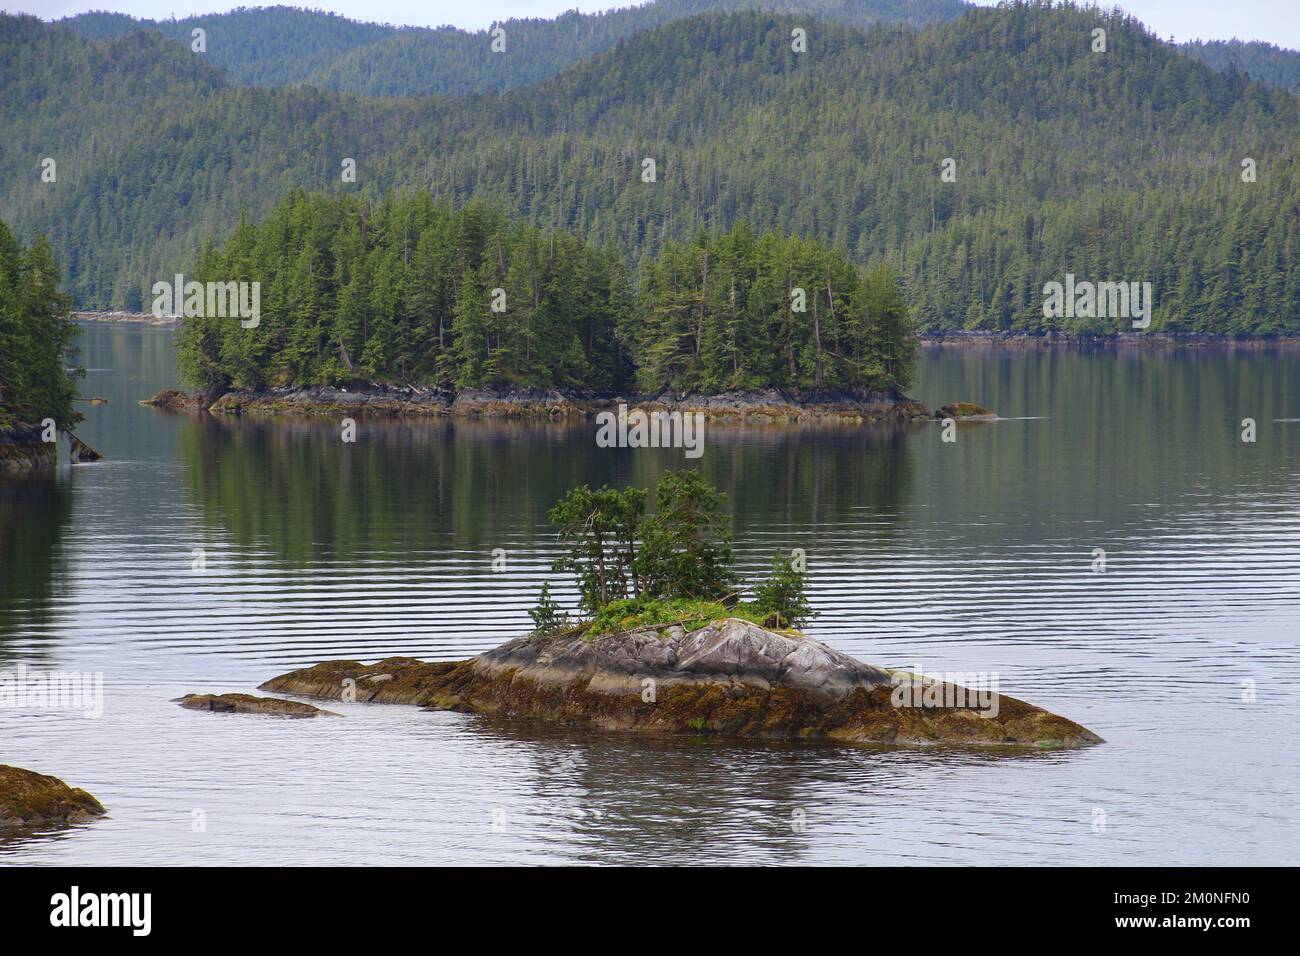 Coastal landscape forest in the Inside Passage British Columbia, Canada Stock Photo